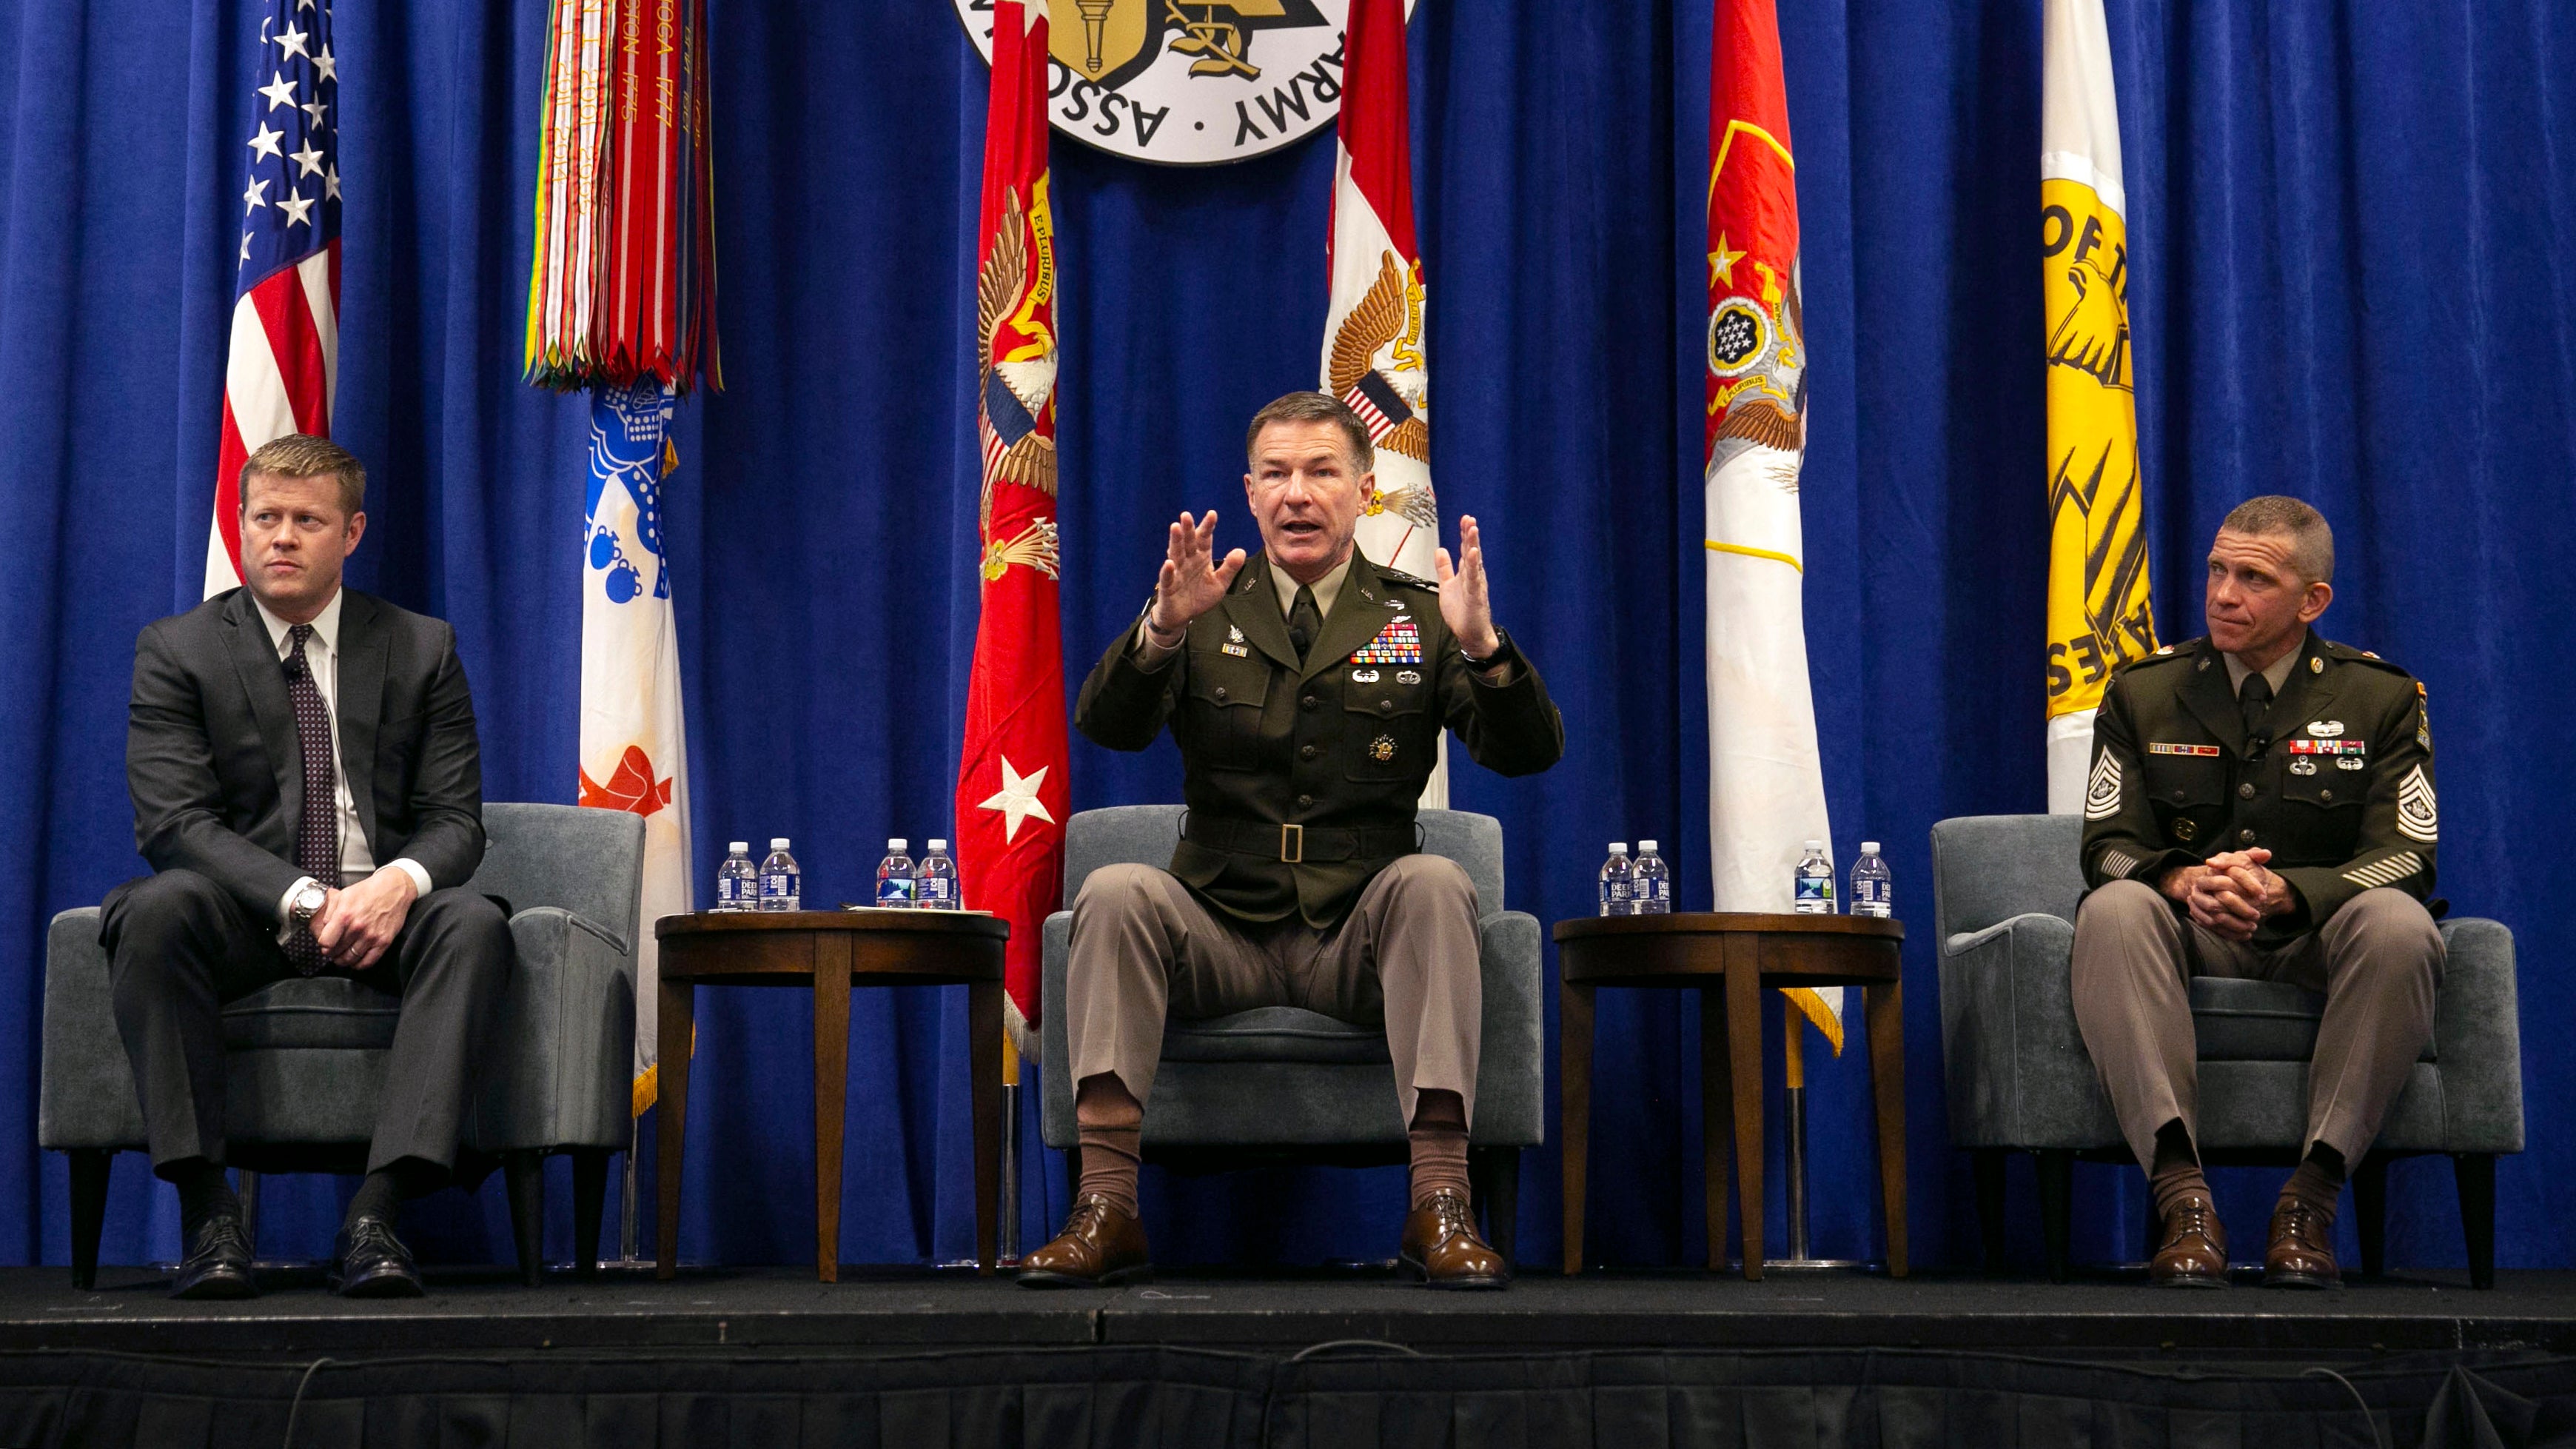 Flanked by Secretary of the Army Ryan Mcarthy, left, and Sergeant Major Michael Grinston, Army Chief of Staff James McConville speaks at the Family Forum IV: Senior Leaders Town Hall at the 2019 AUSA Annual Meeting and Exposition.